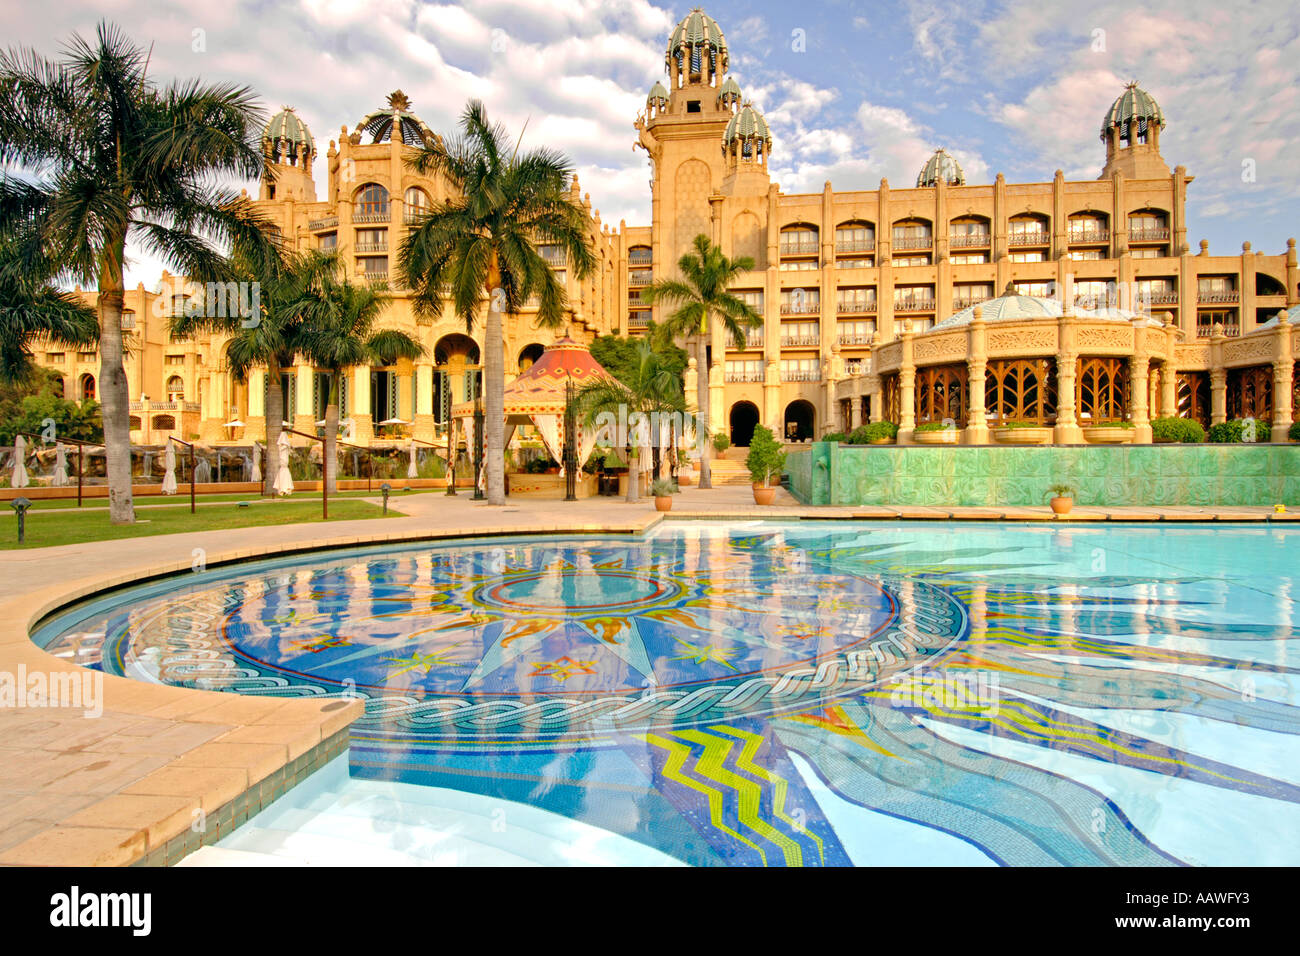 A dawn view of the Palace of the Lost City hotel and its swimming pool in the Sun City resort in South Africa. Stock Photo